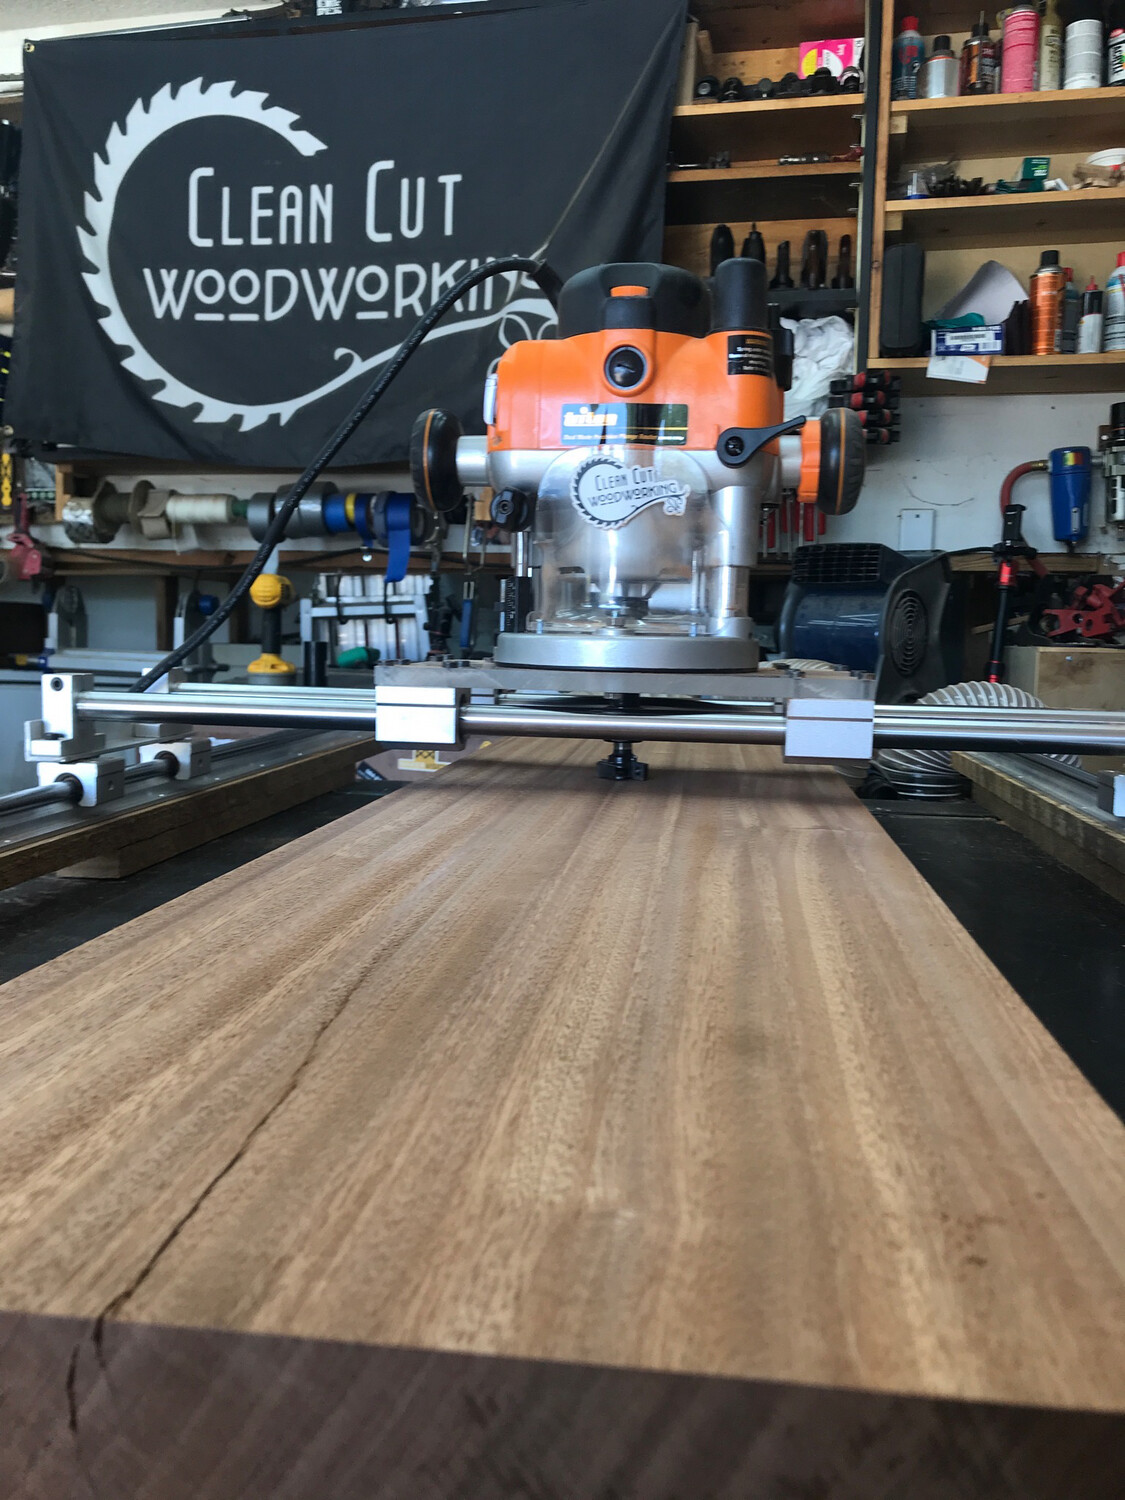 47" Wide Woodworking Router Sled